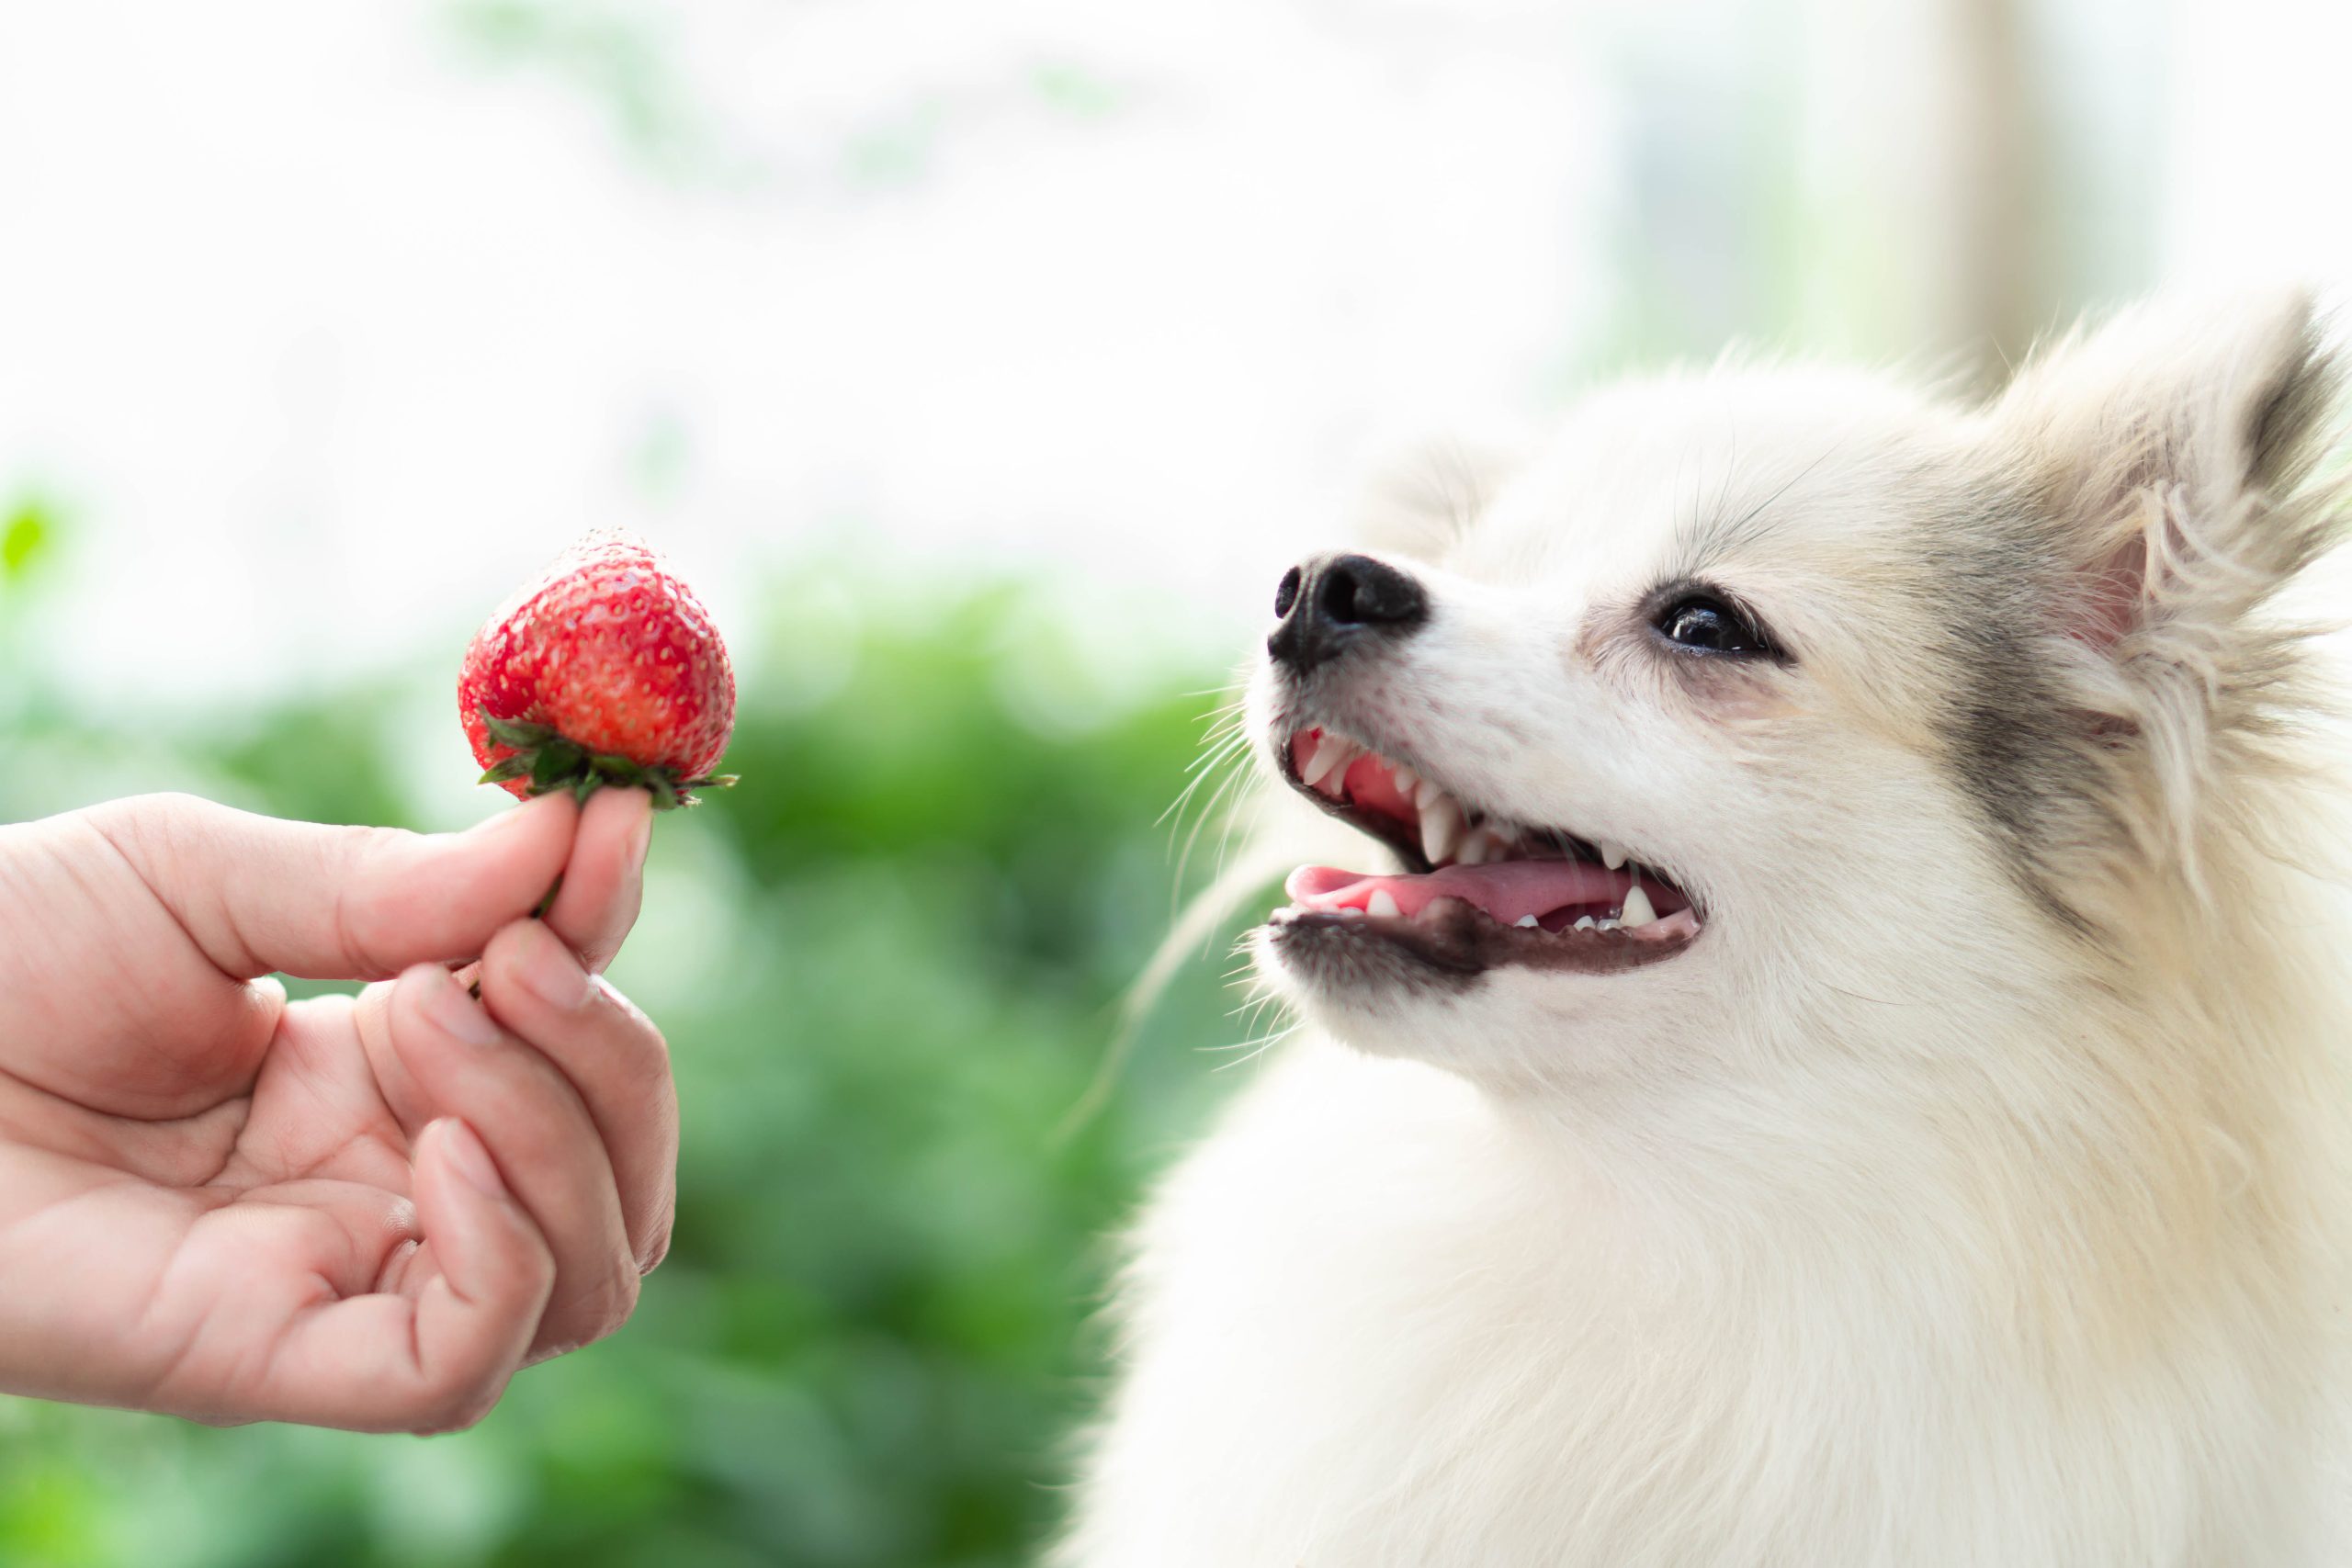 What Fruits Can Dogs Eat? 6 of the Best Fruit Snacks for Your Pup